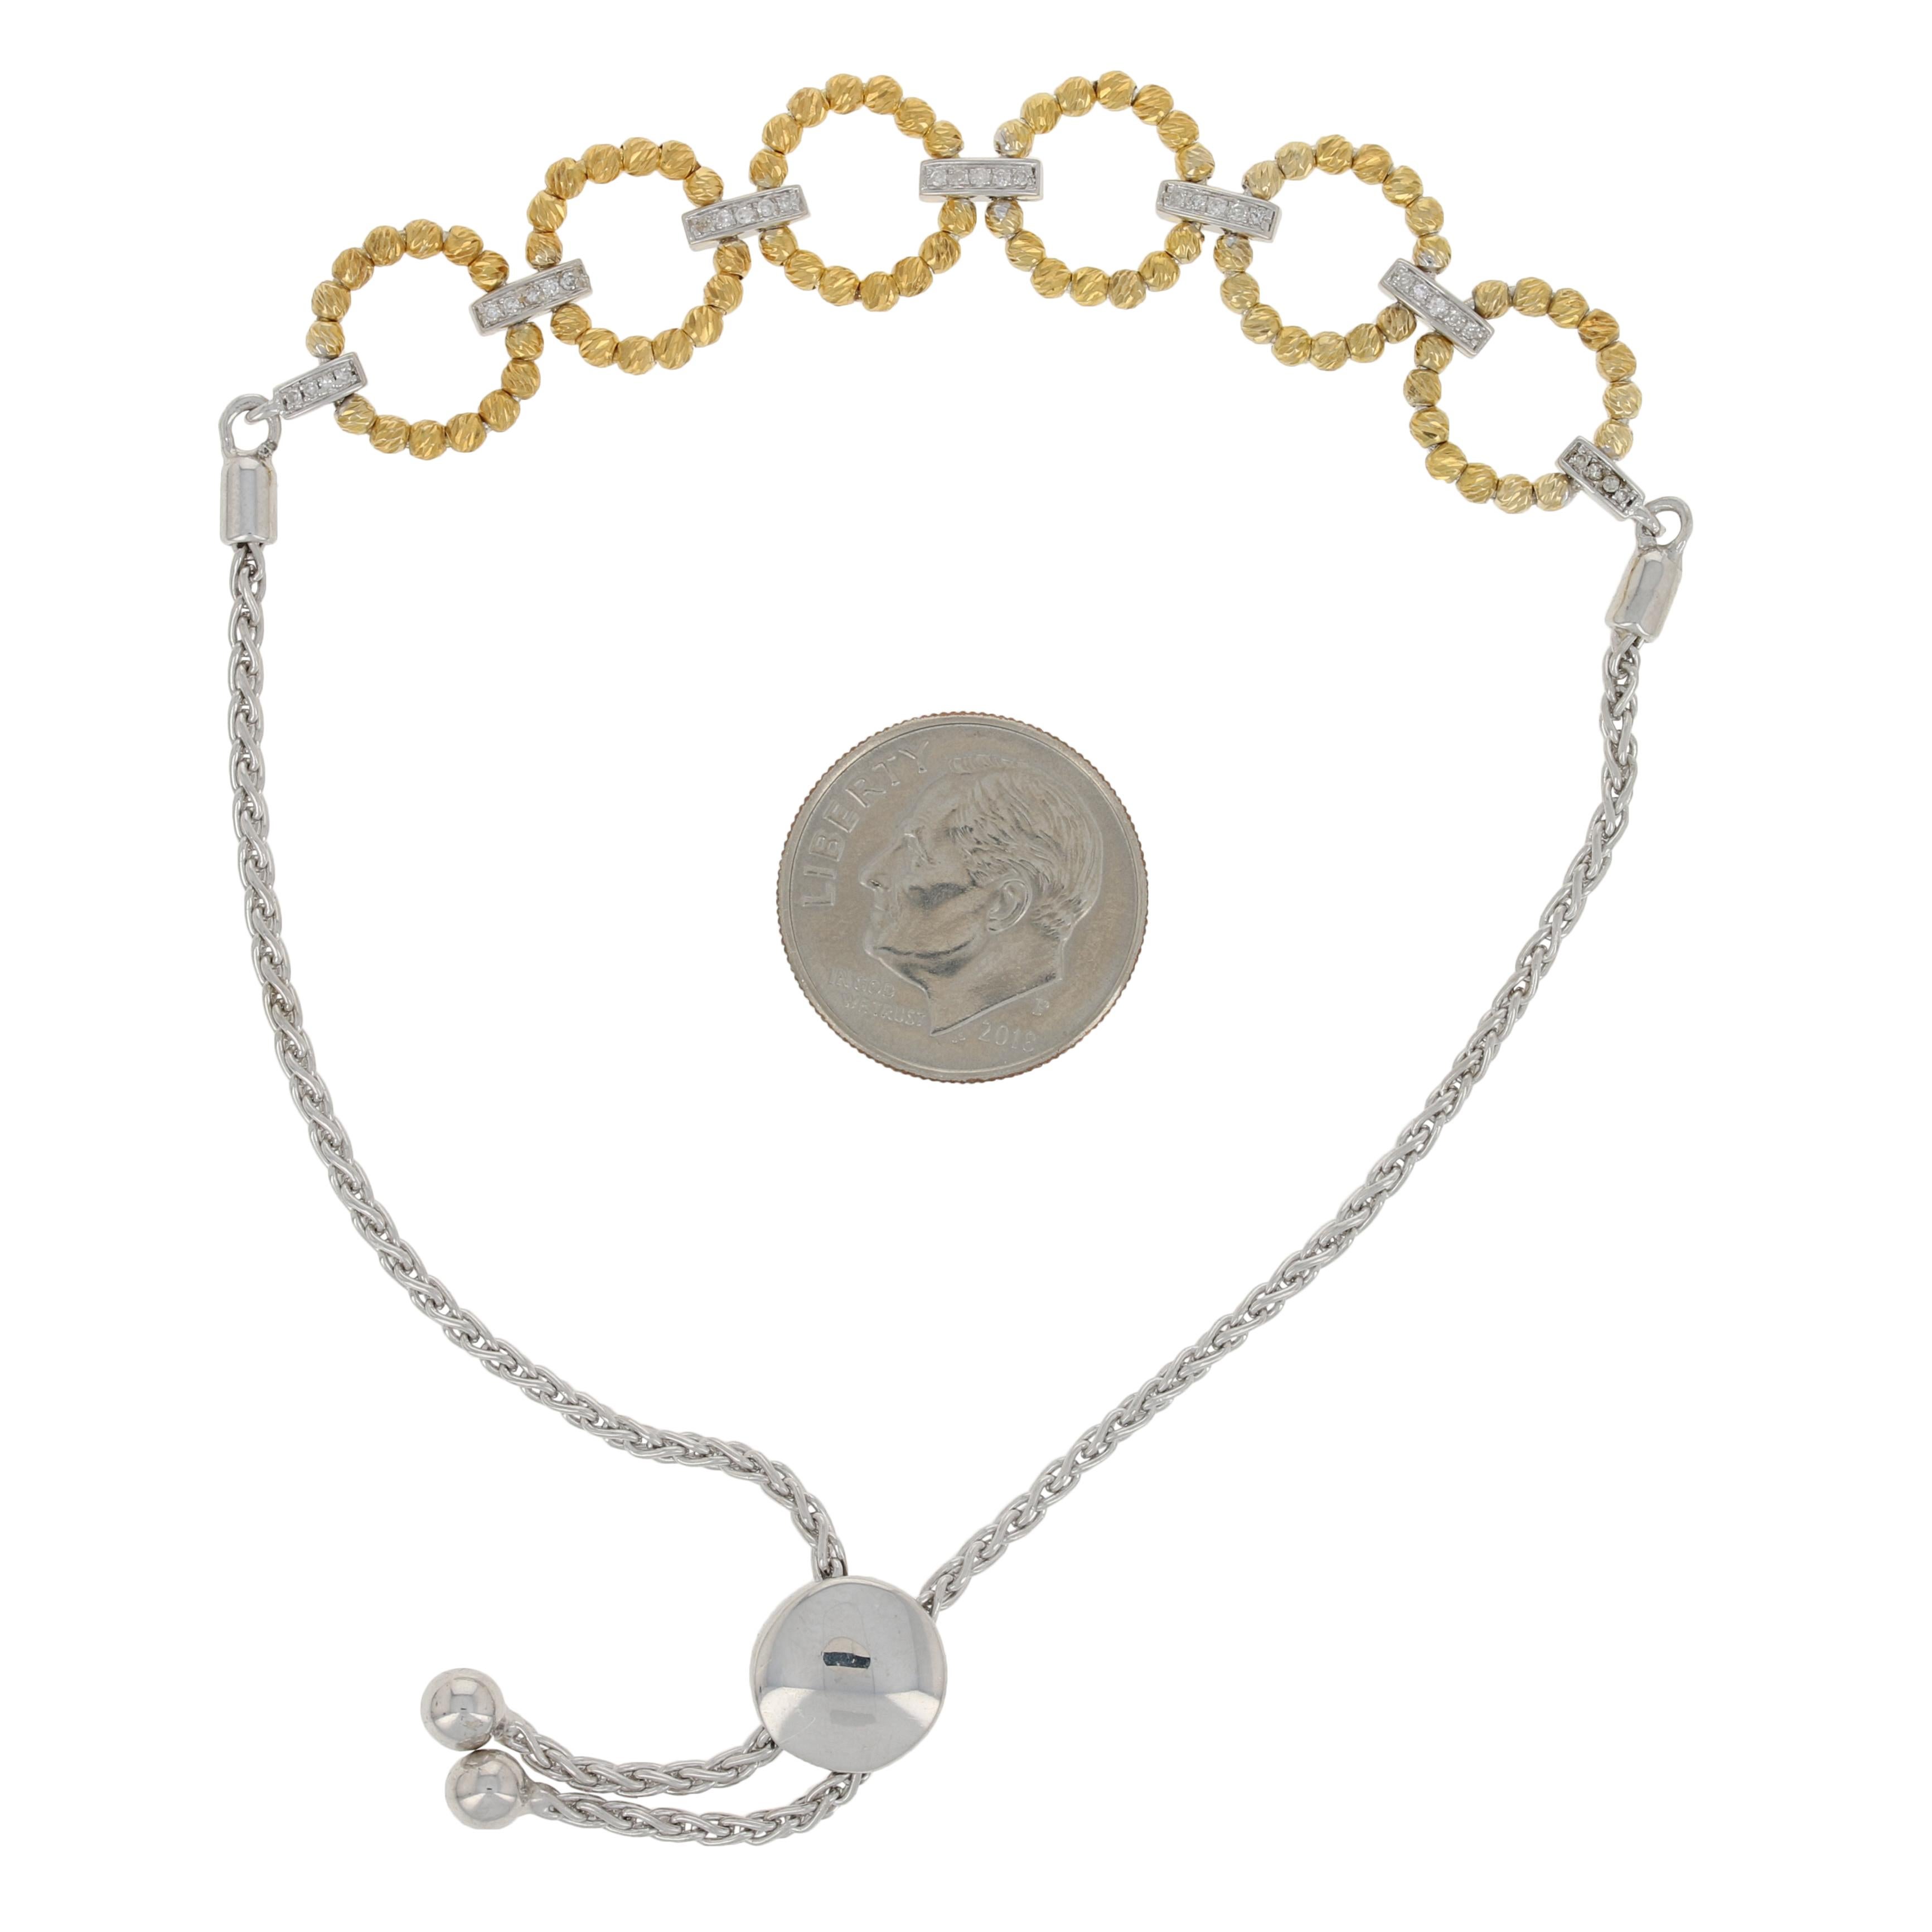 Women's New Diamond-Accented Bracelet Sterling Silver & 10k Gold Adjustable Wheat Chain For Sale